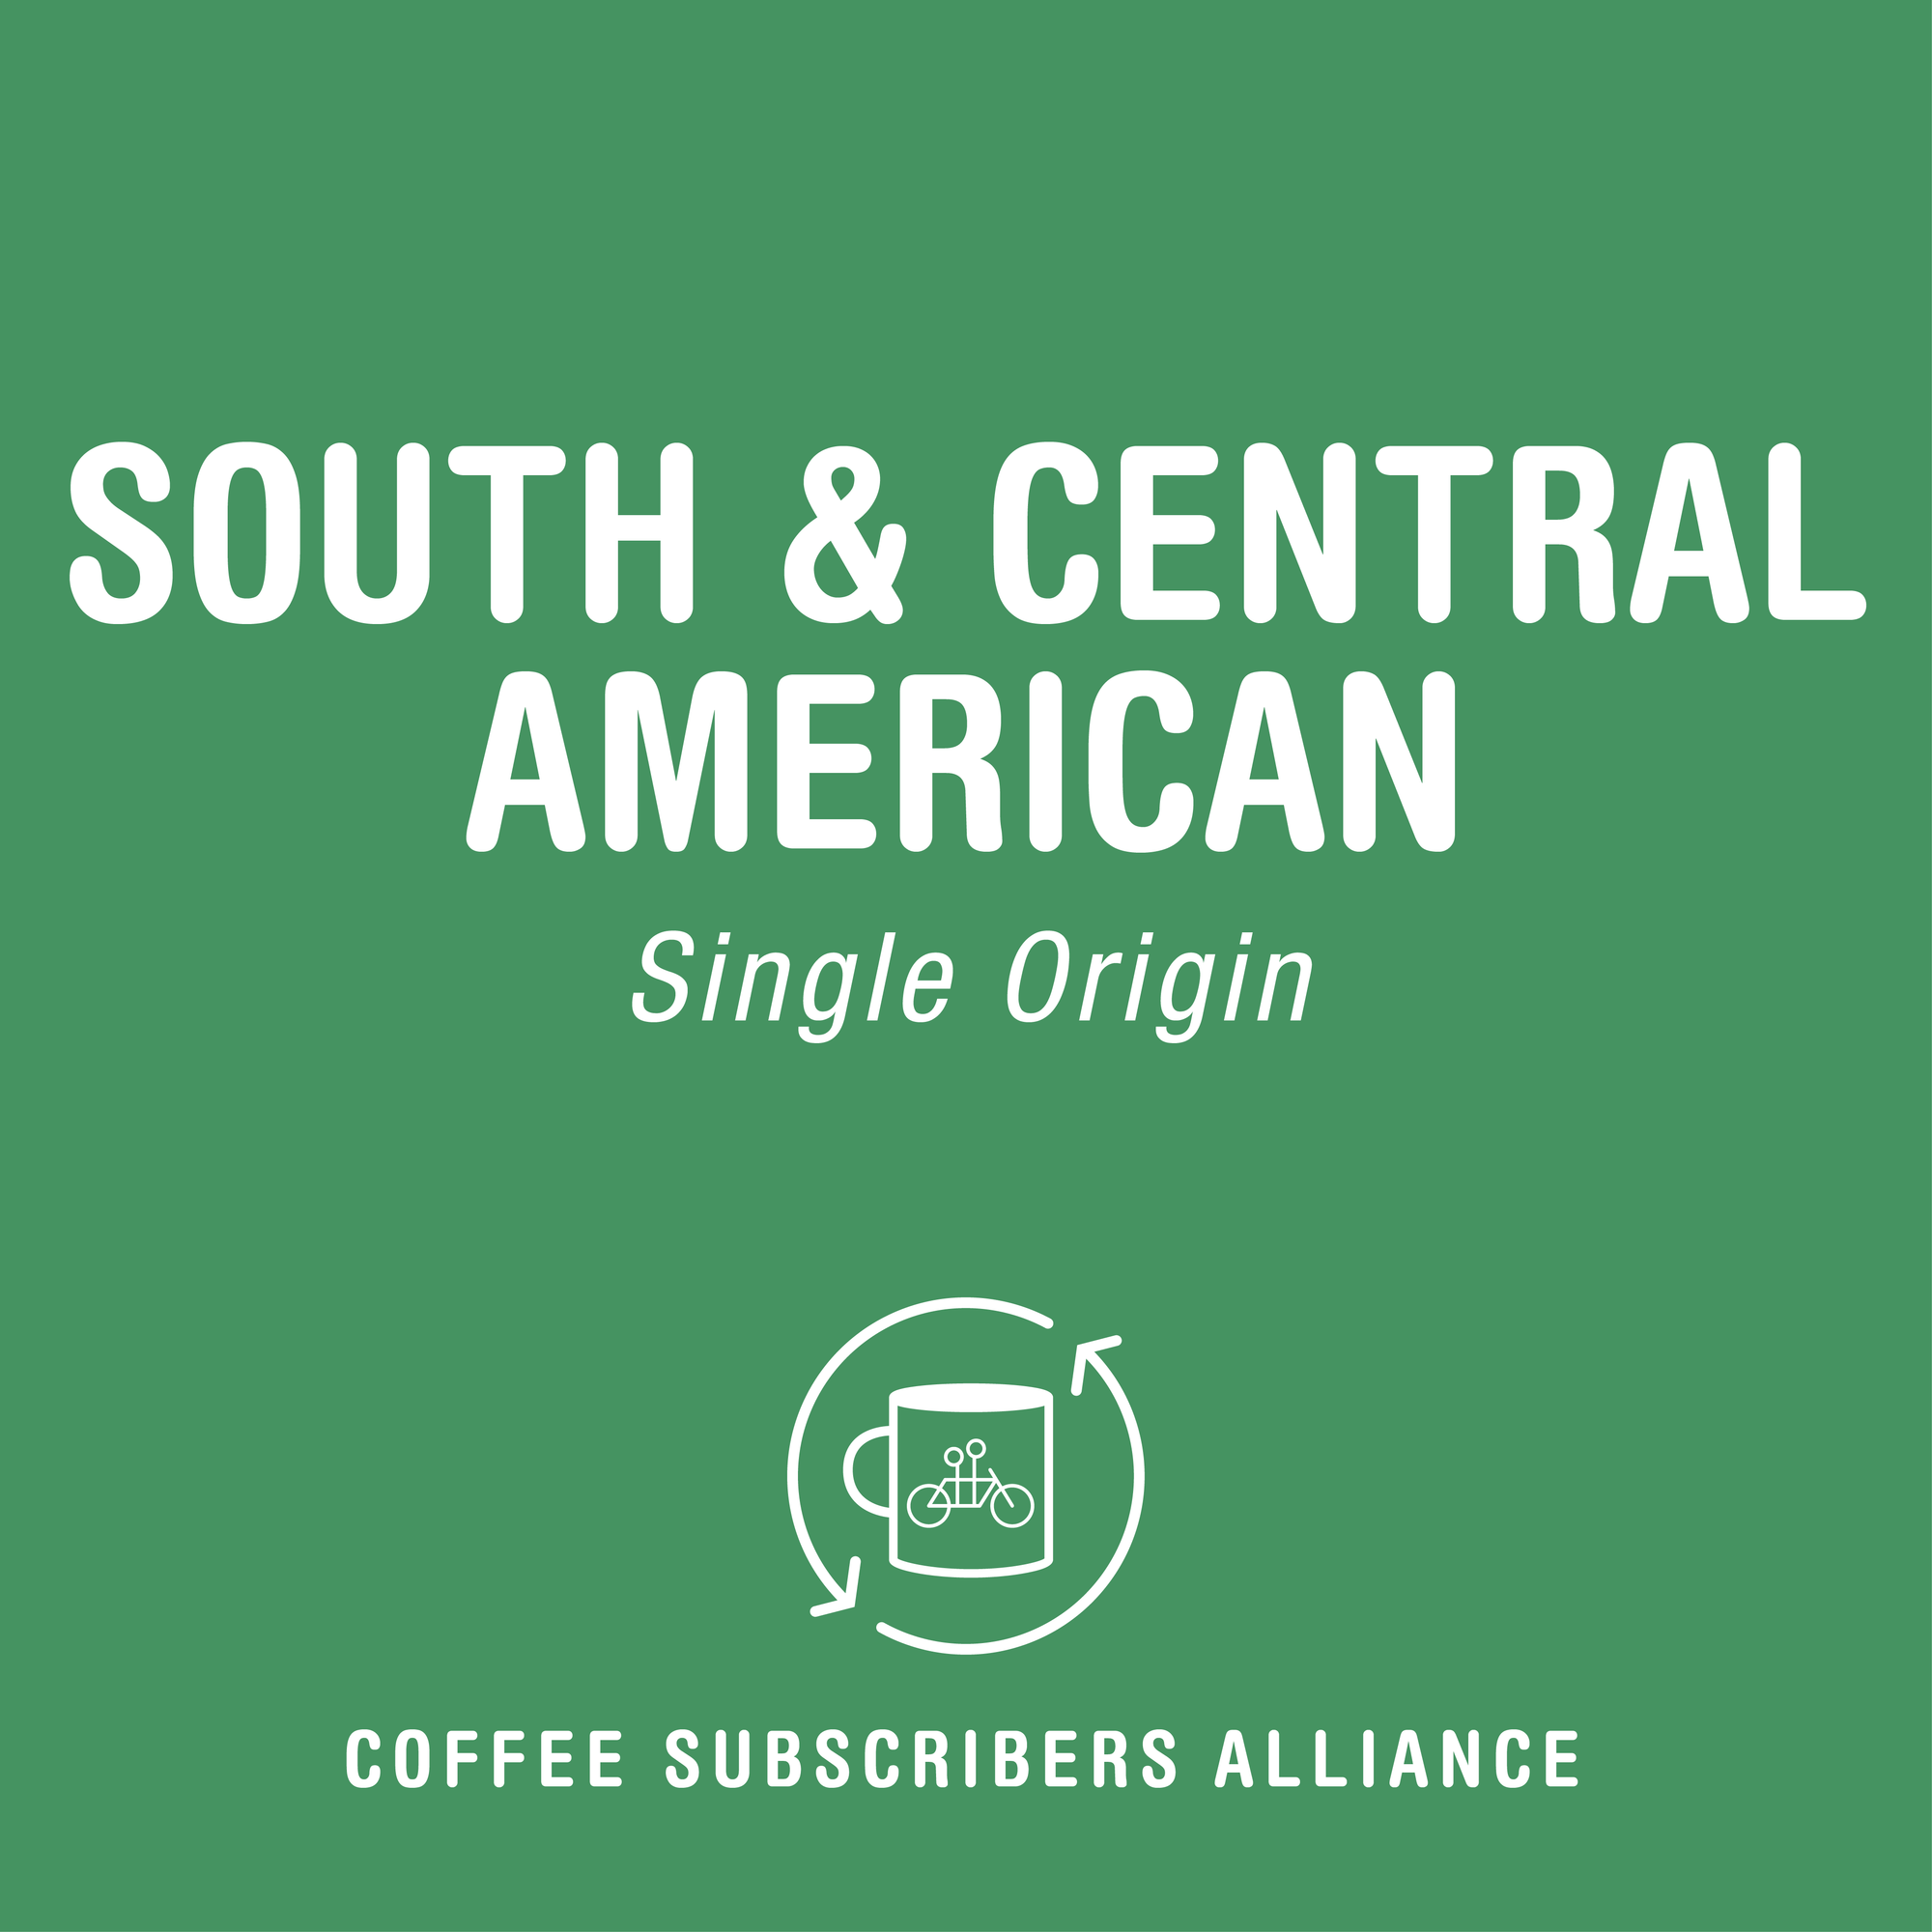 Graphic with a green background featuring text "South & Central American Subscription Gift - 2 Weeks x 12" above a logo depicting a coffee cup with a bicycle, labeled "Tandem Coffee Roasters.